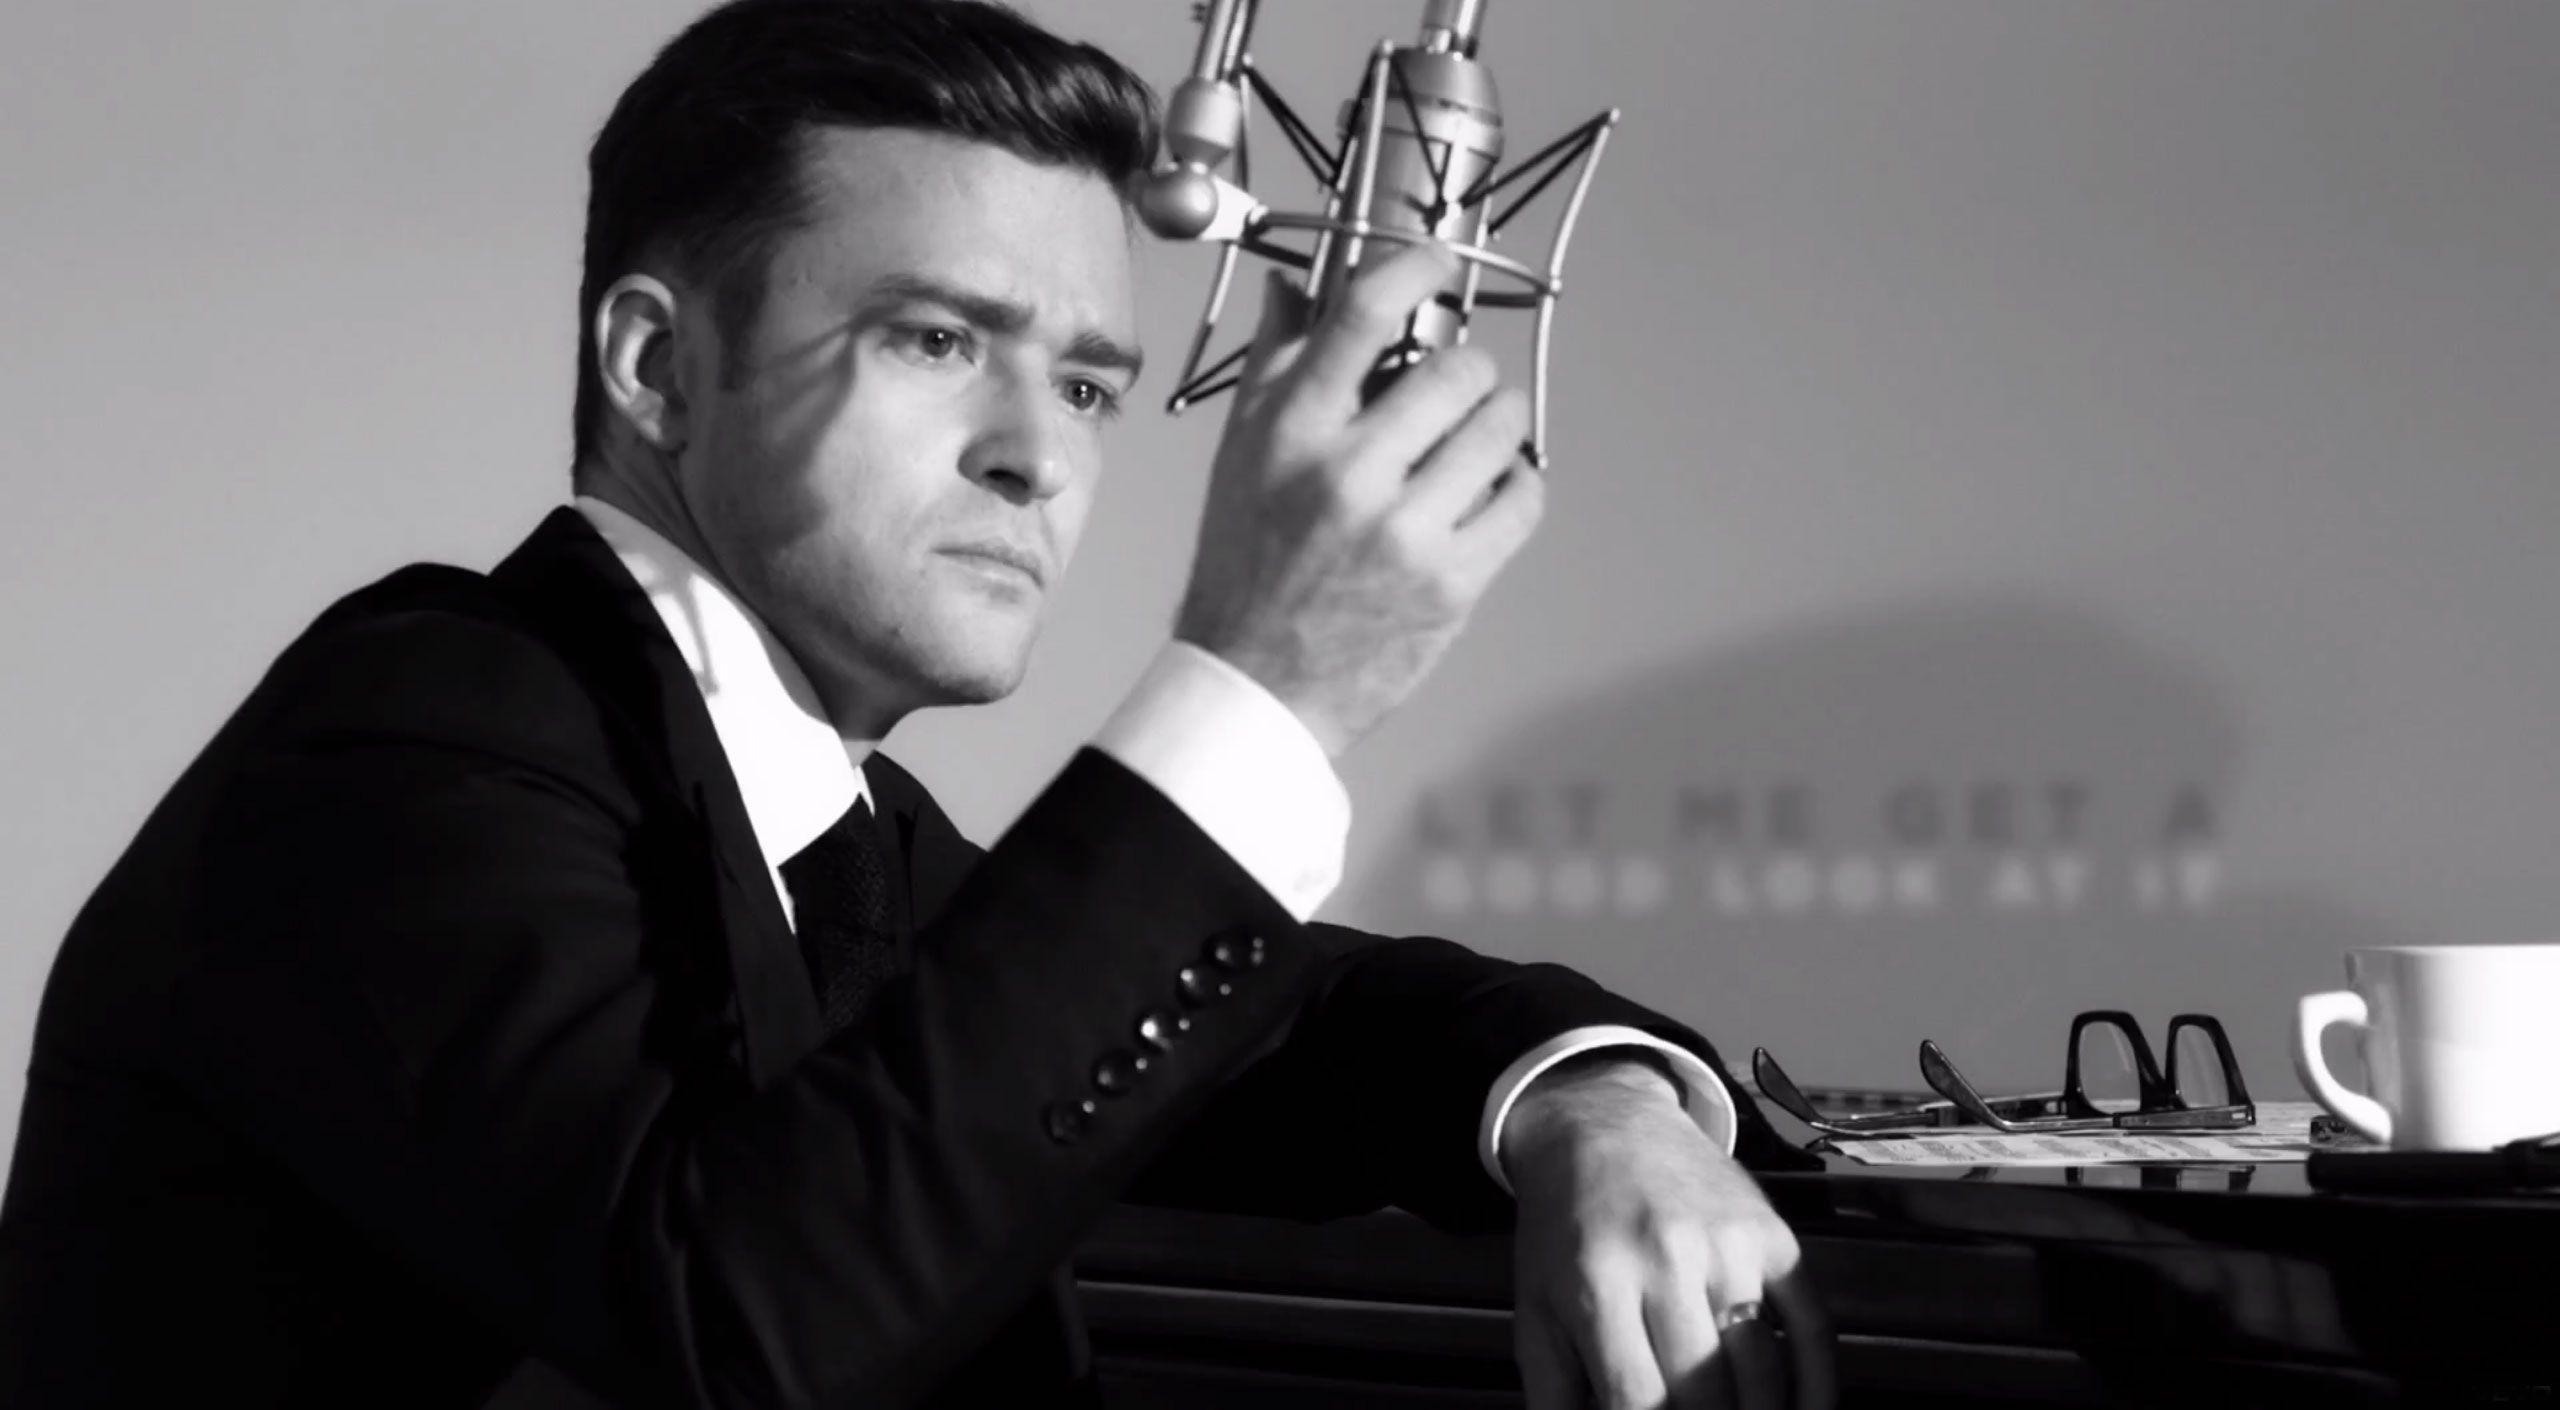 Justin Timberlake is coming back with a new Album!!! News